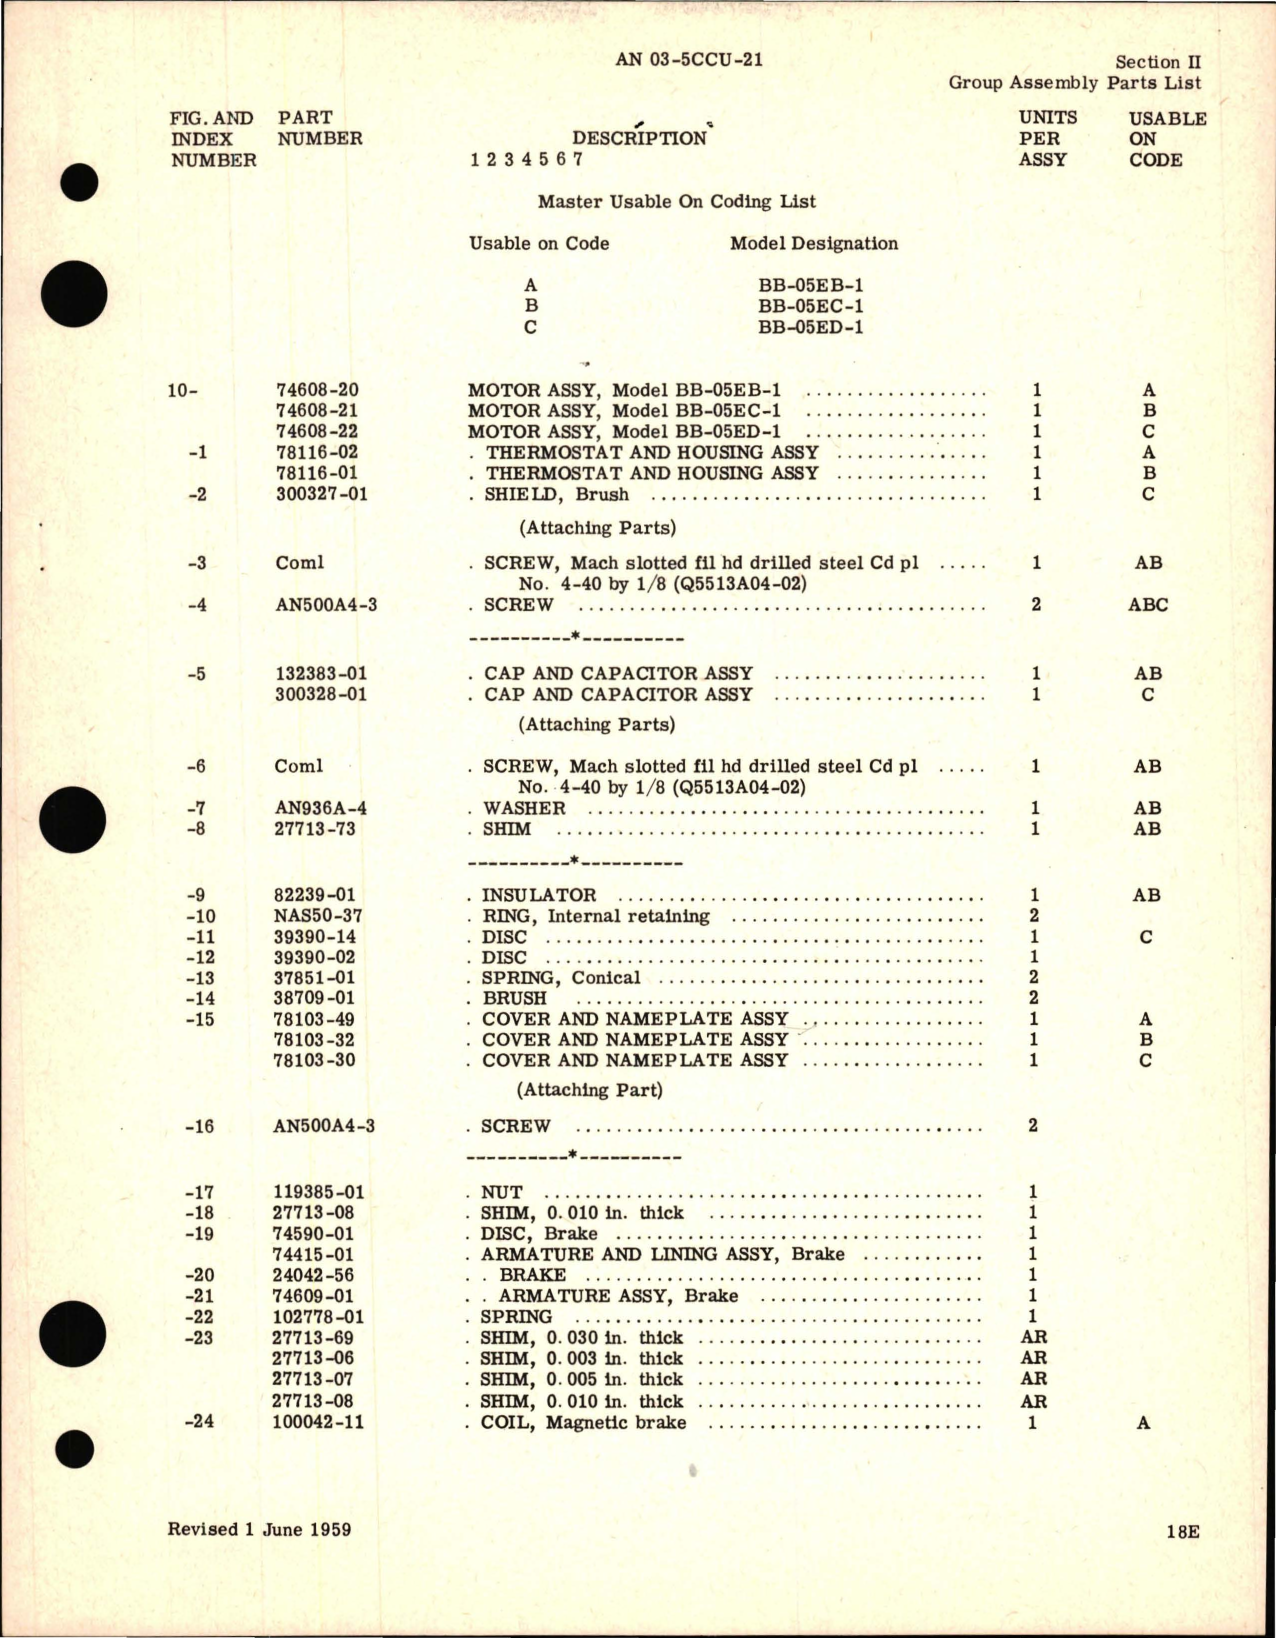 Sample page 7 from AirCorps Library document: Illustrated Parts Breakdown for Fractional Horsepower Motors - B Frame Series